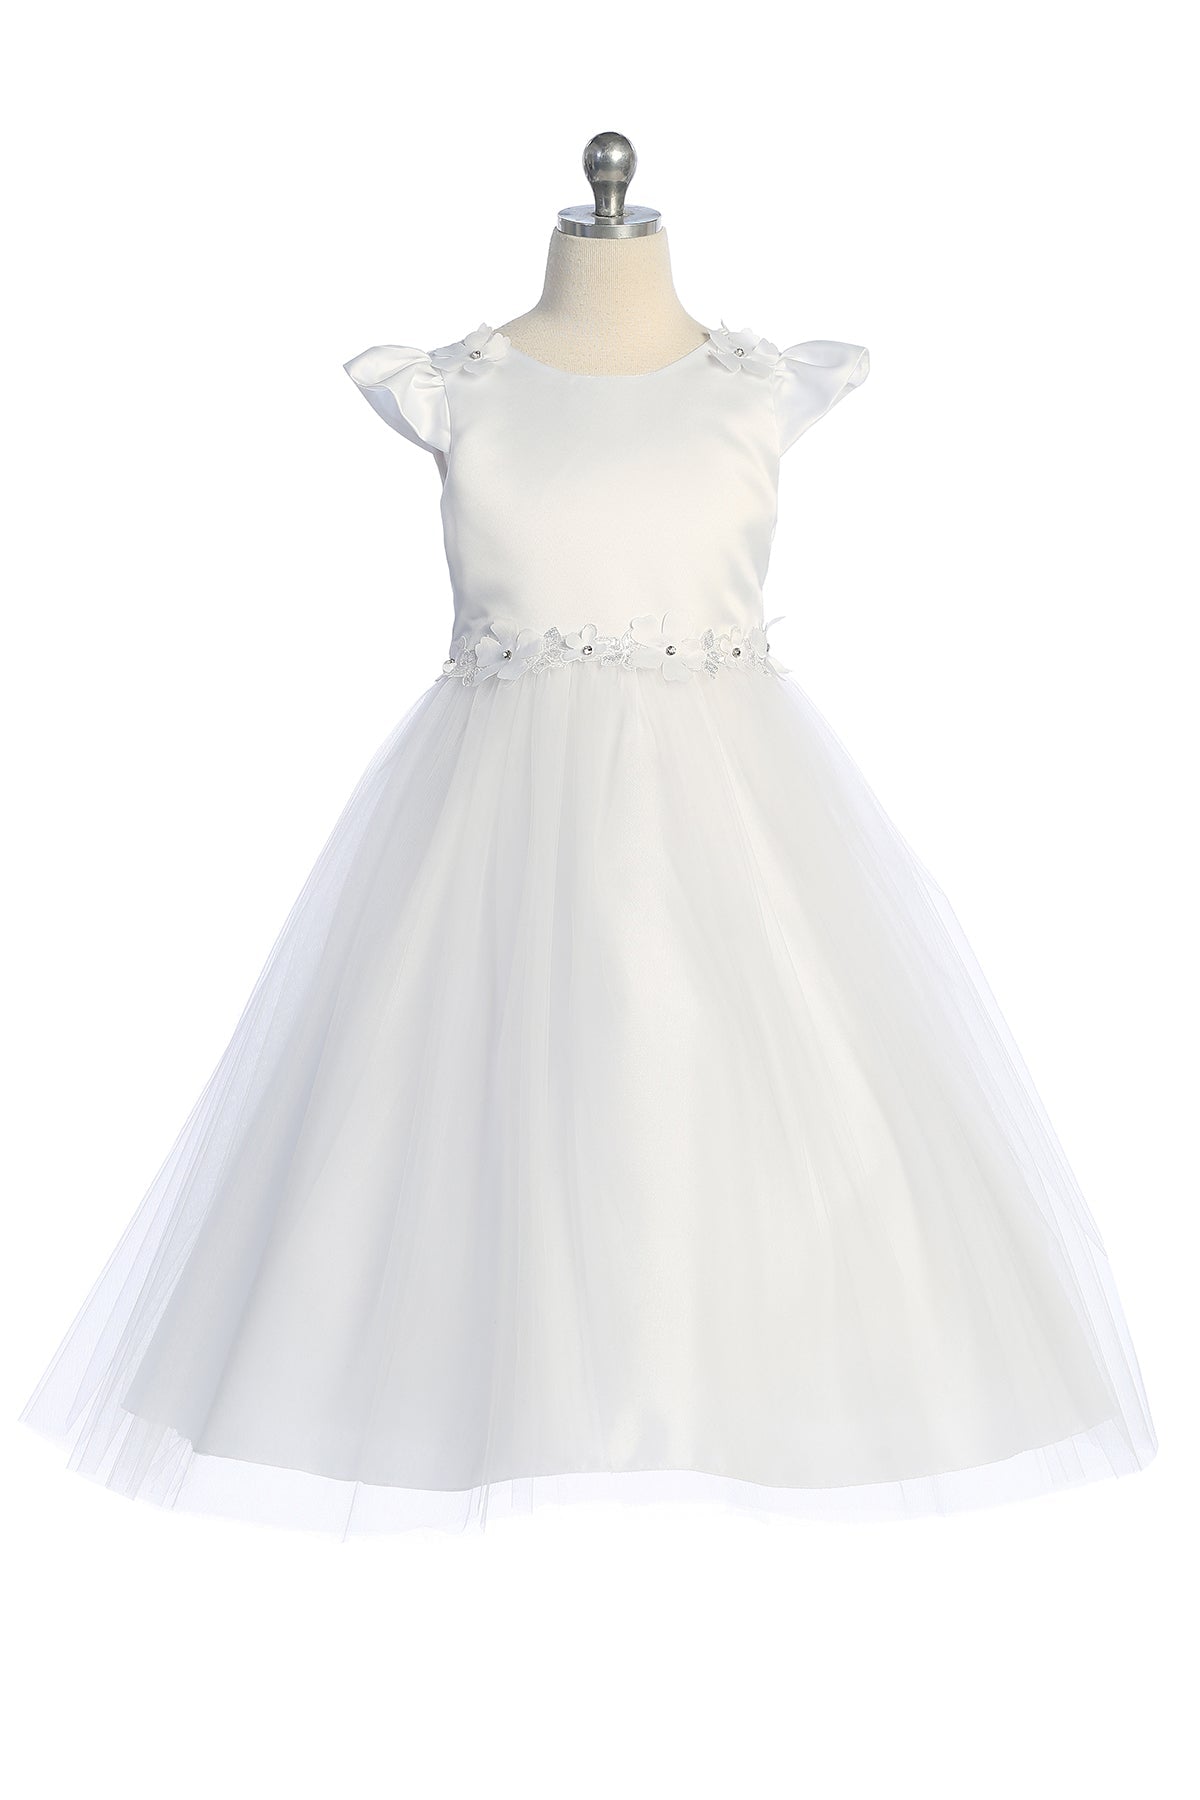 Dress - Capped Sleeve Satin & Tulle Girls Dress With Floral Trim